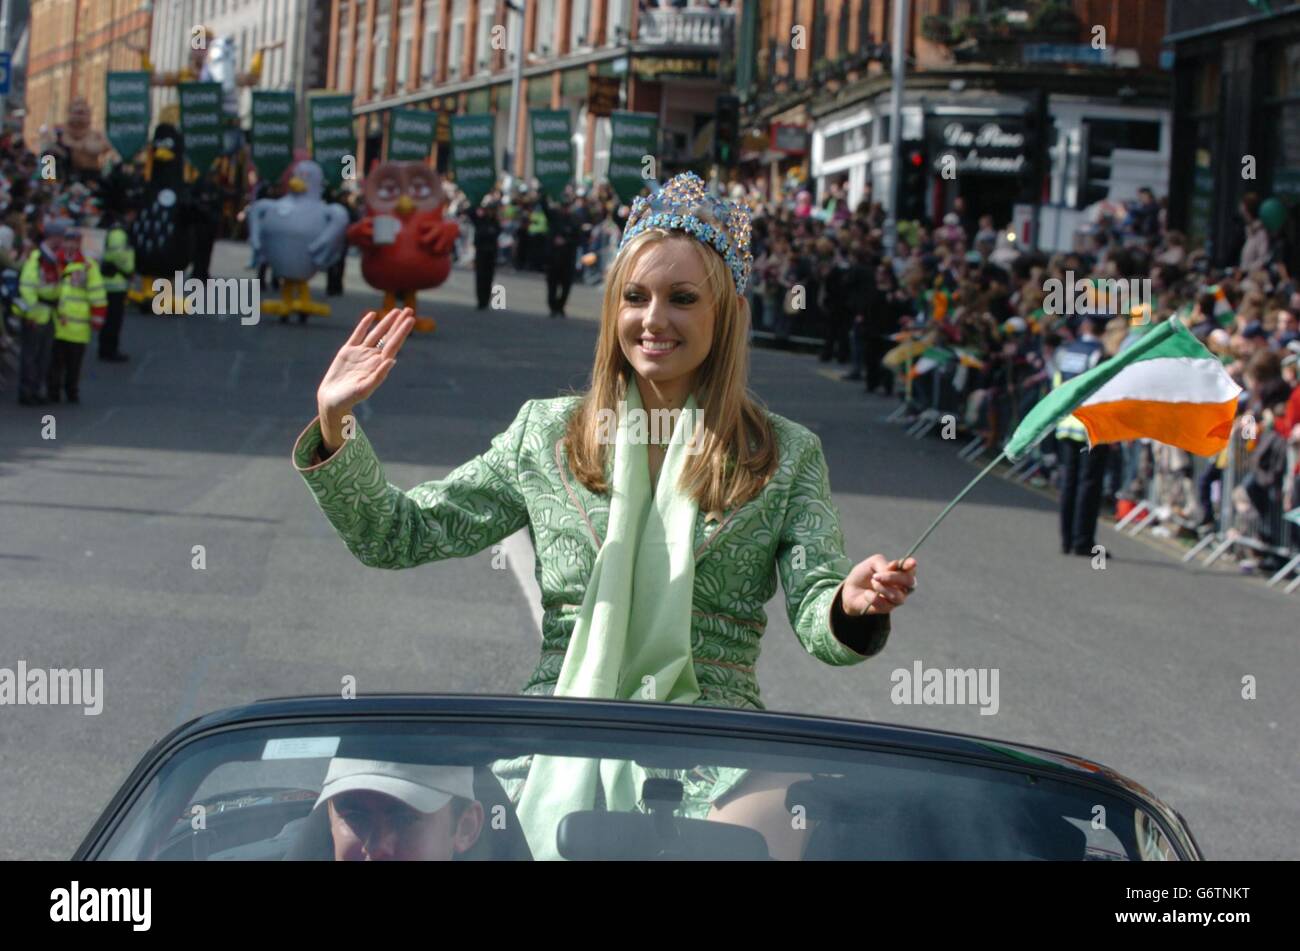 Miss Ireland and Miss World winner and Grand Marshal of the Dublin St Patrick's Day Parade Rosanna Davison, waves to the crowds, as she passes through the city. It is estimated that some 500,000 people lined the streets of Dublin for the celebrations. Stock Photo